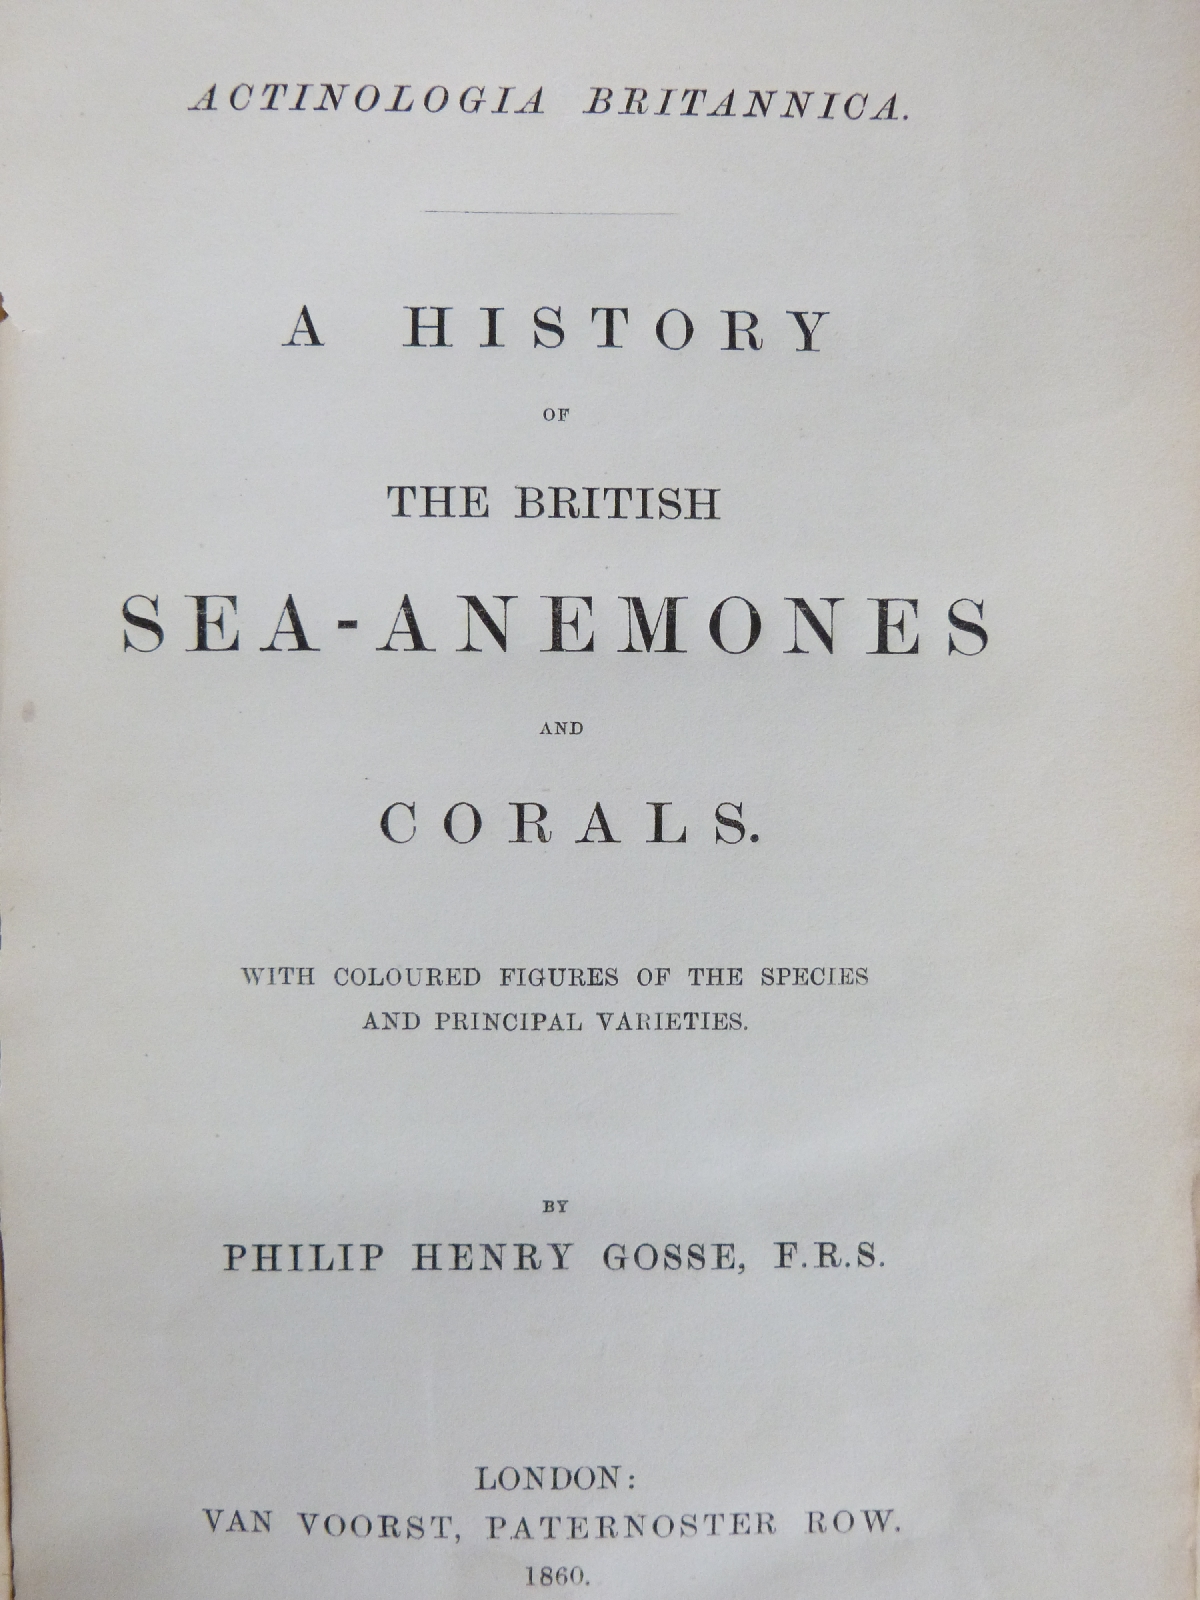 A History of The British Sea-Anemones and Corals (Actinologia Britannica) by Philip Henry Gosse with - Image 2 of 3